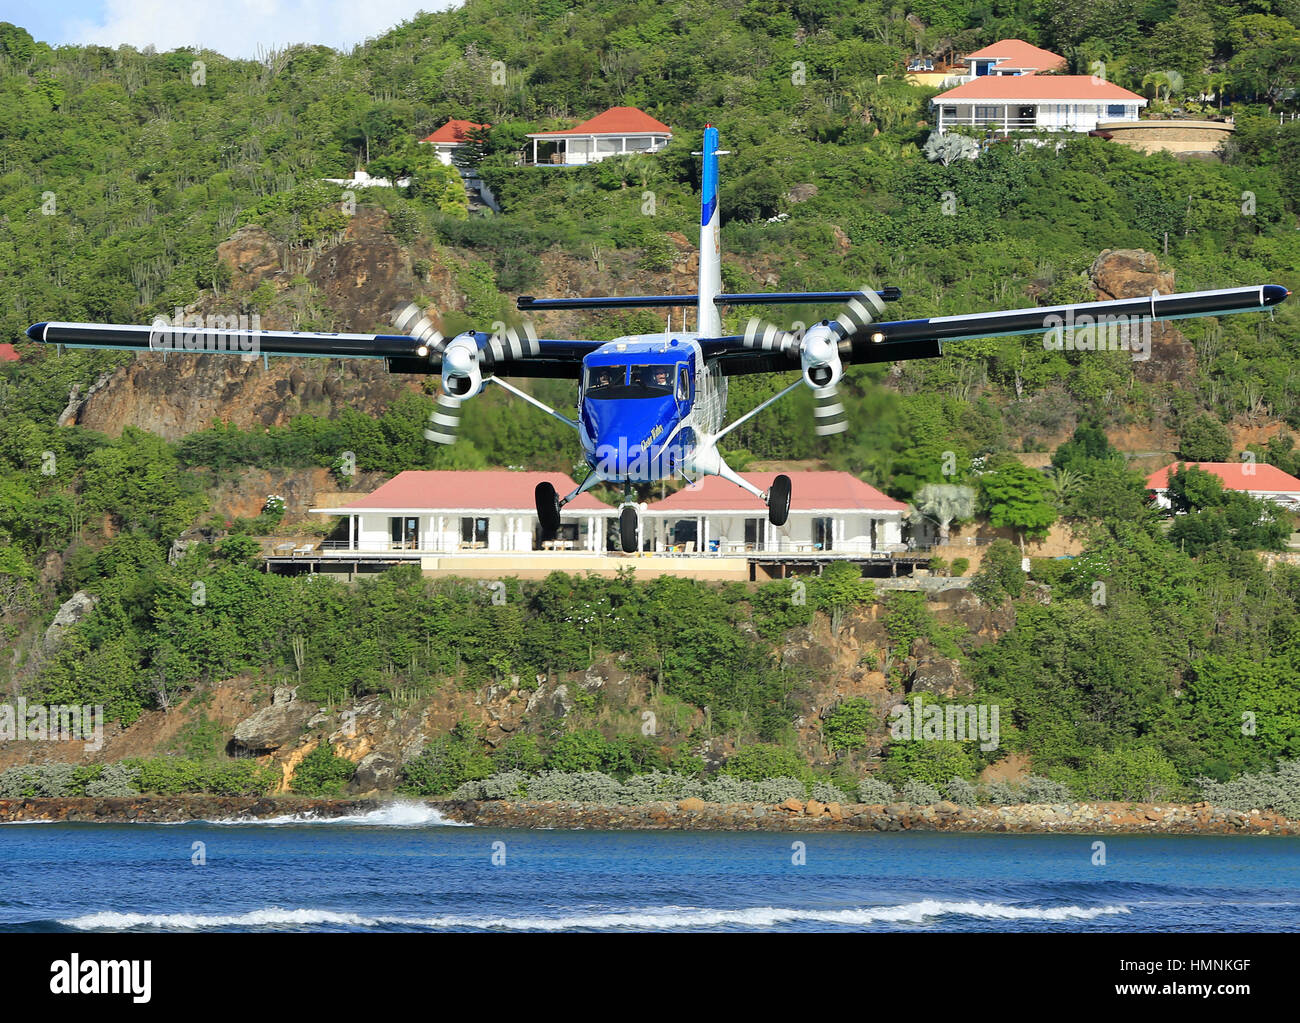 A Winair Twin Otter on short finals to Runway 28 at St. Barth's Stock Photo